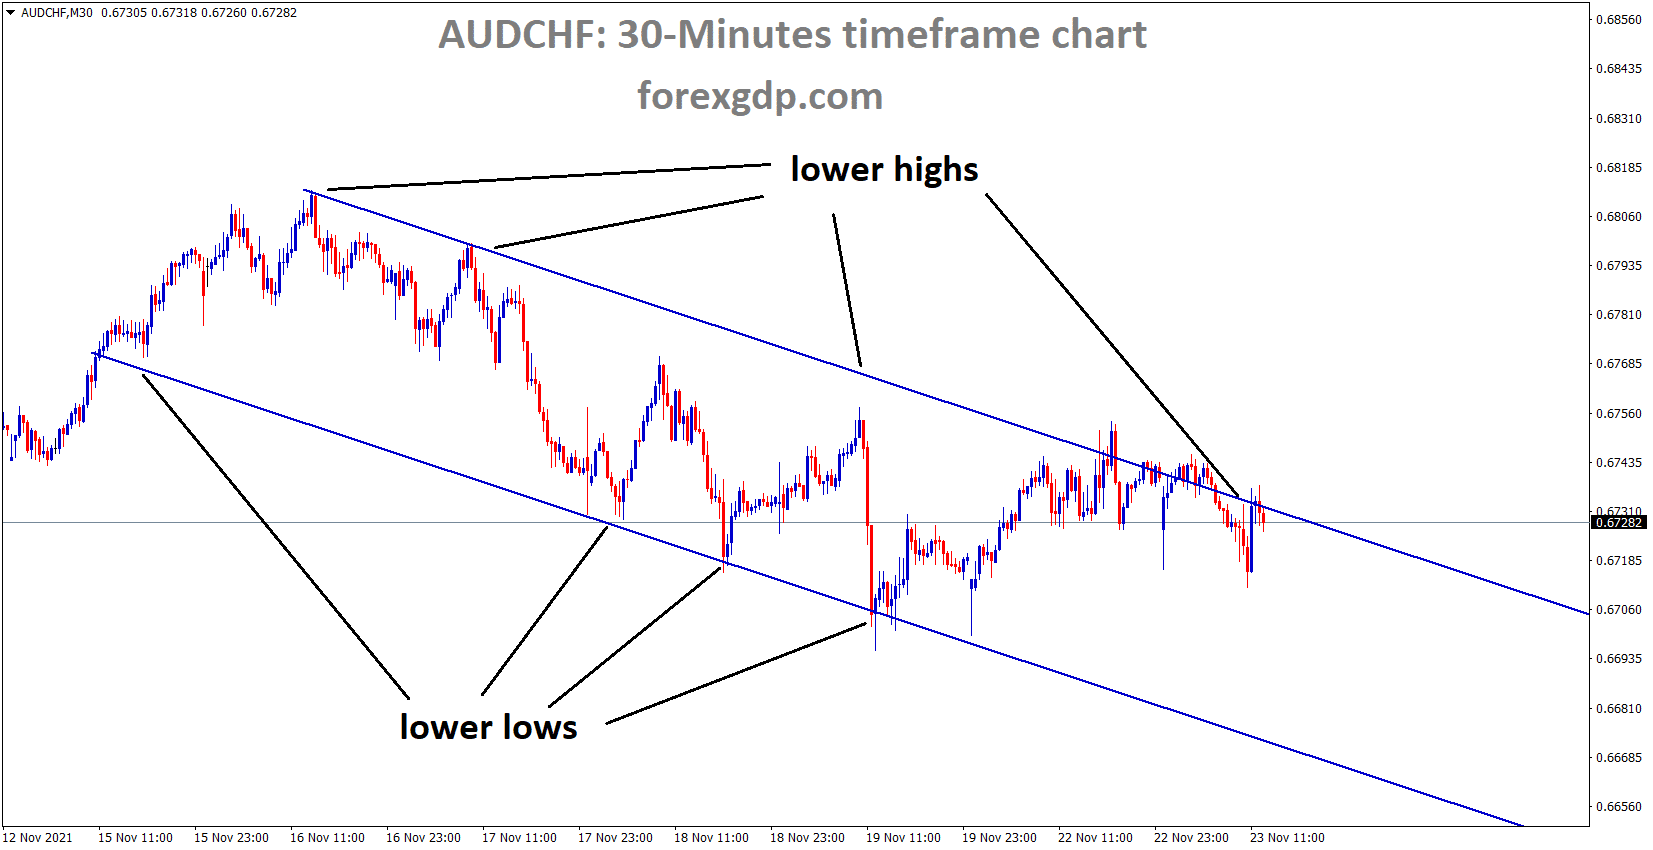 AUDCHF is moving in the Descending channel and market consolidated at the lower high area of the channel